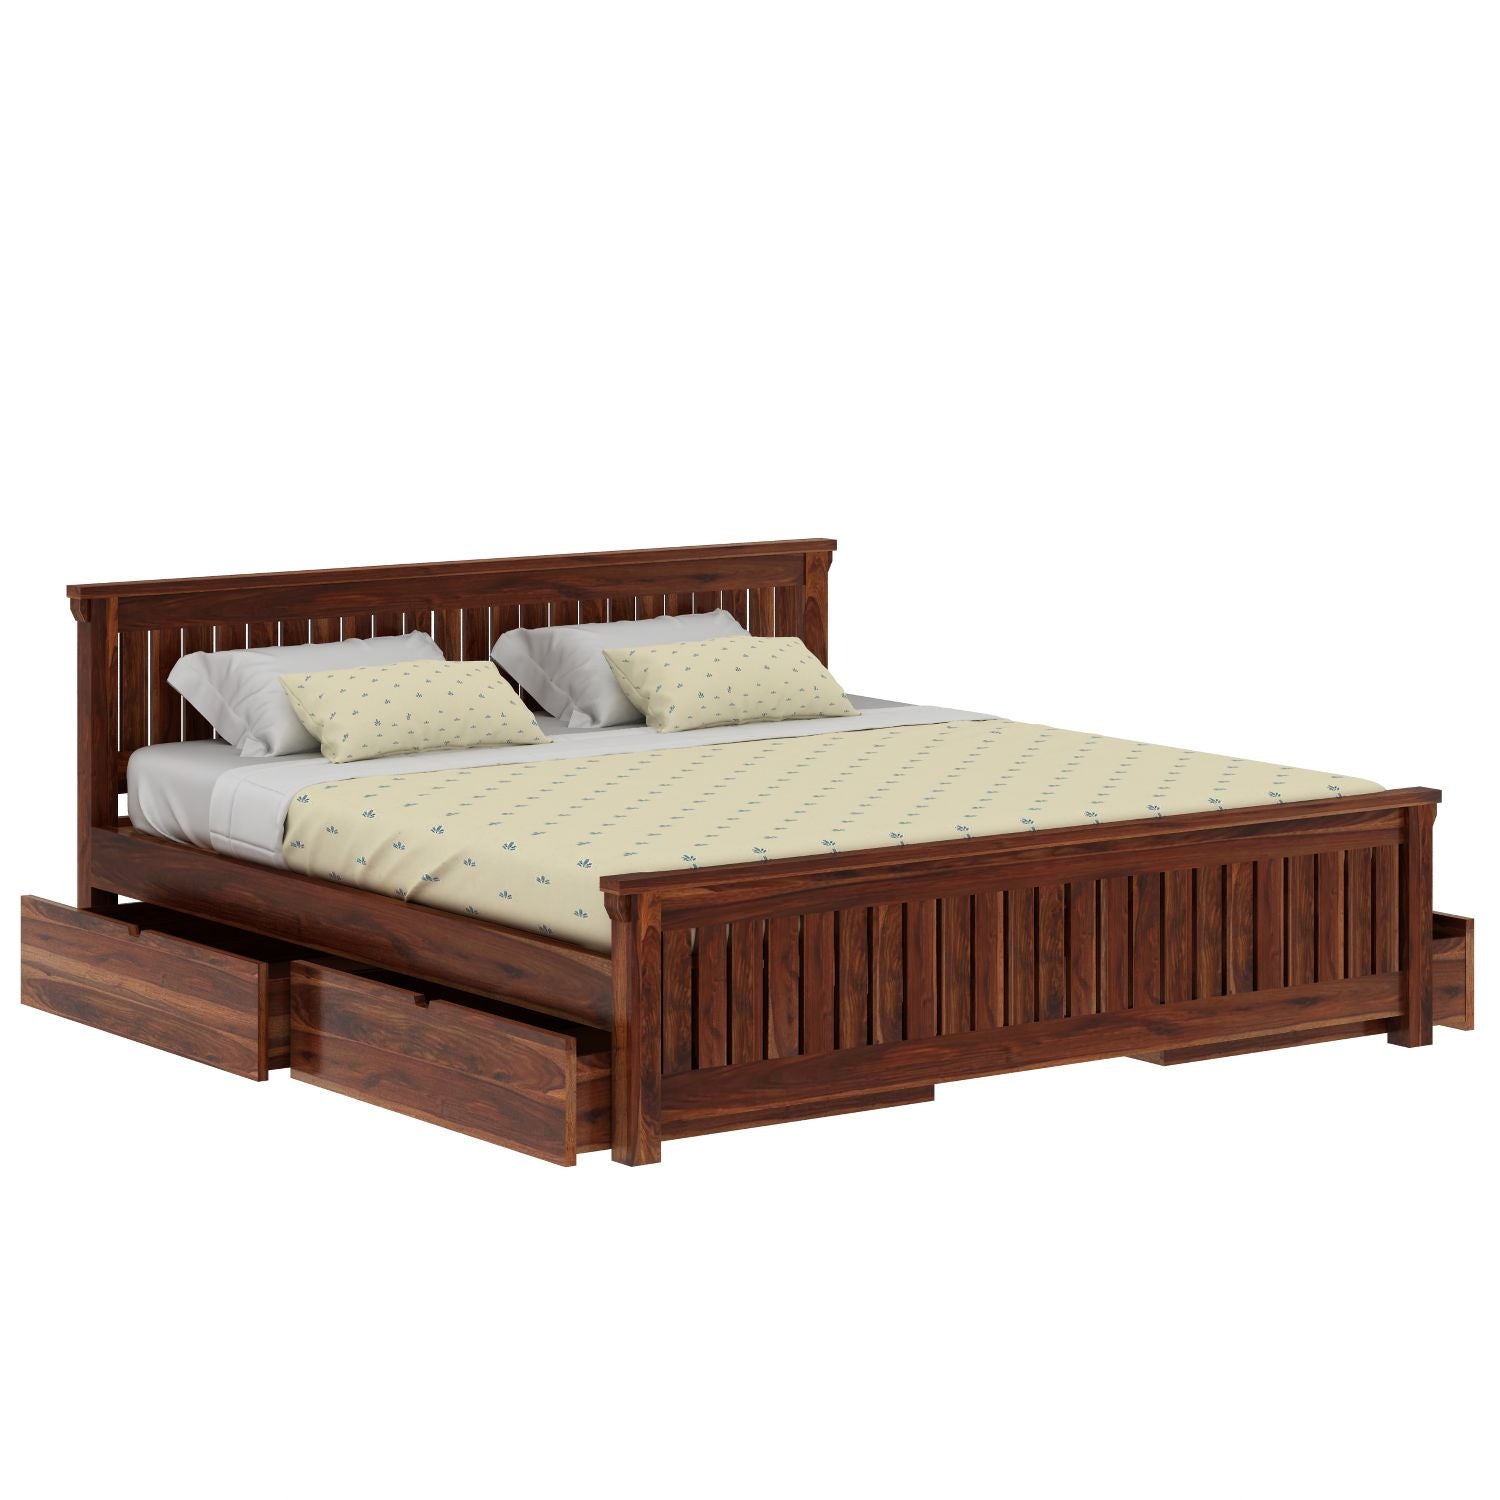 Trinity Solid Sheesham Wood Bed With Four Drawers (Queen Size, Natural Finish)